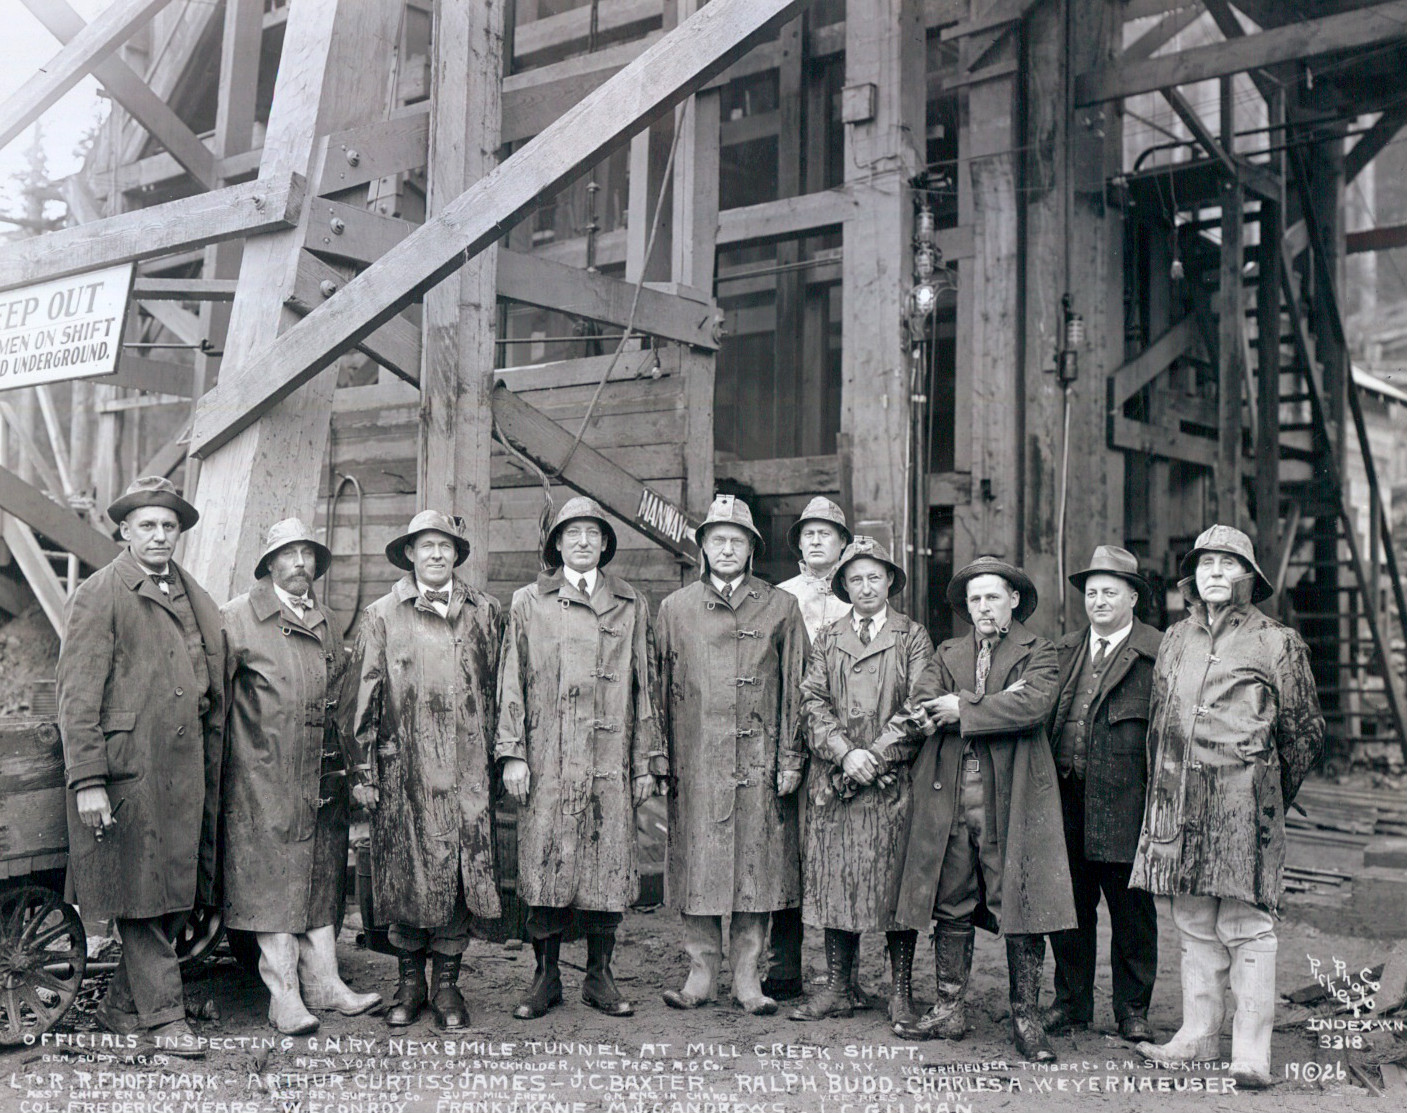 Budd is shown fourth from left in this 1926 photo at the Mill Creek shaft of the Cascade Tunnel